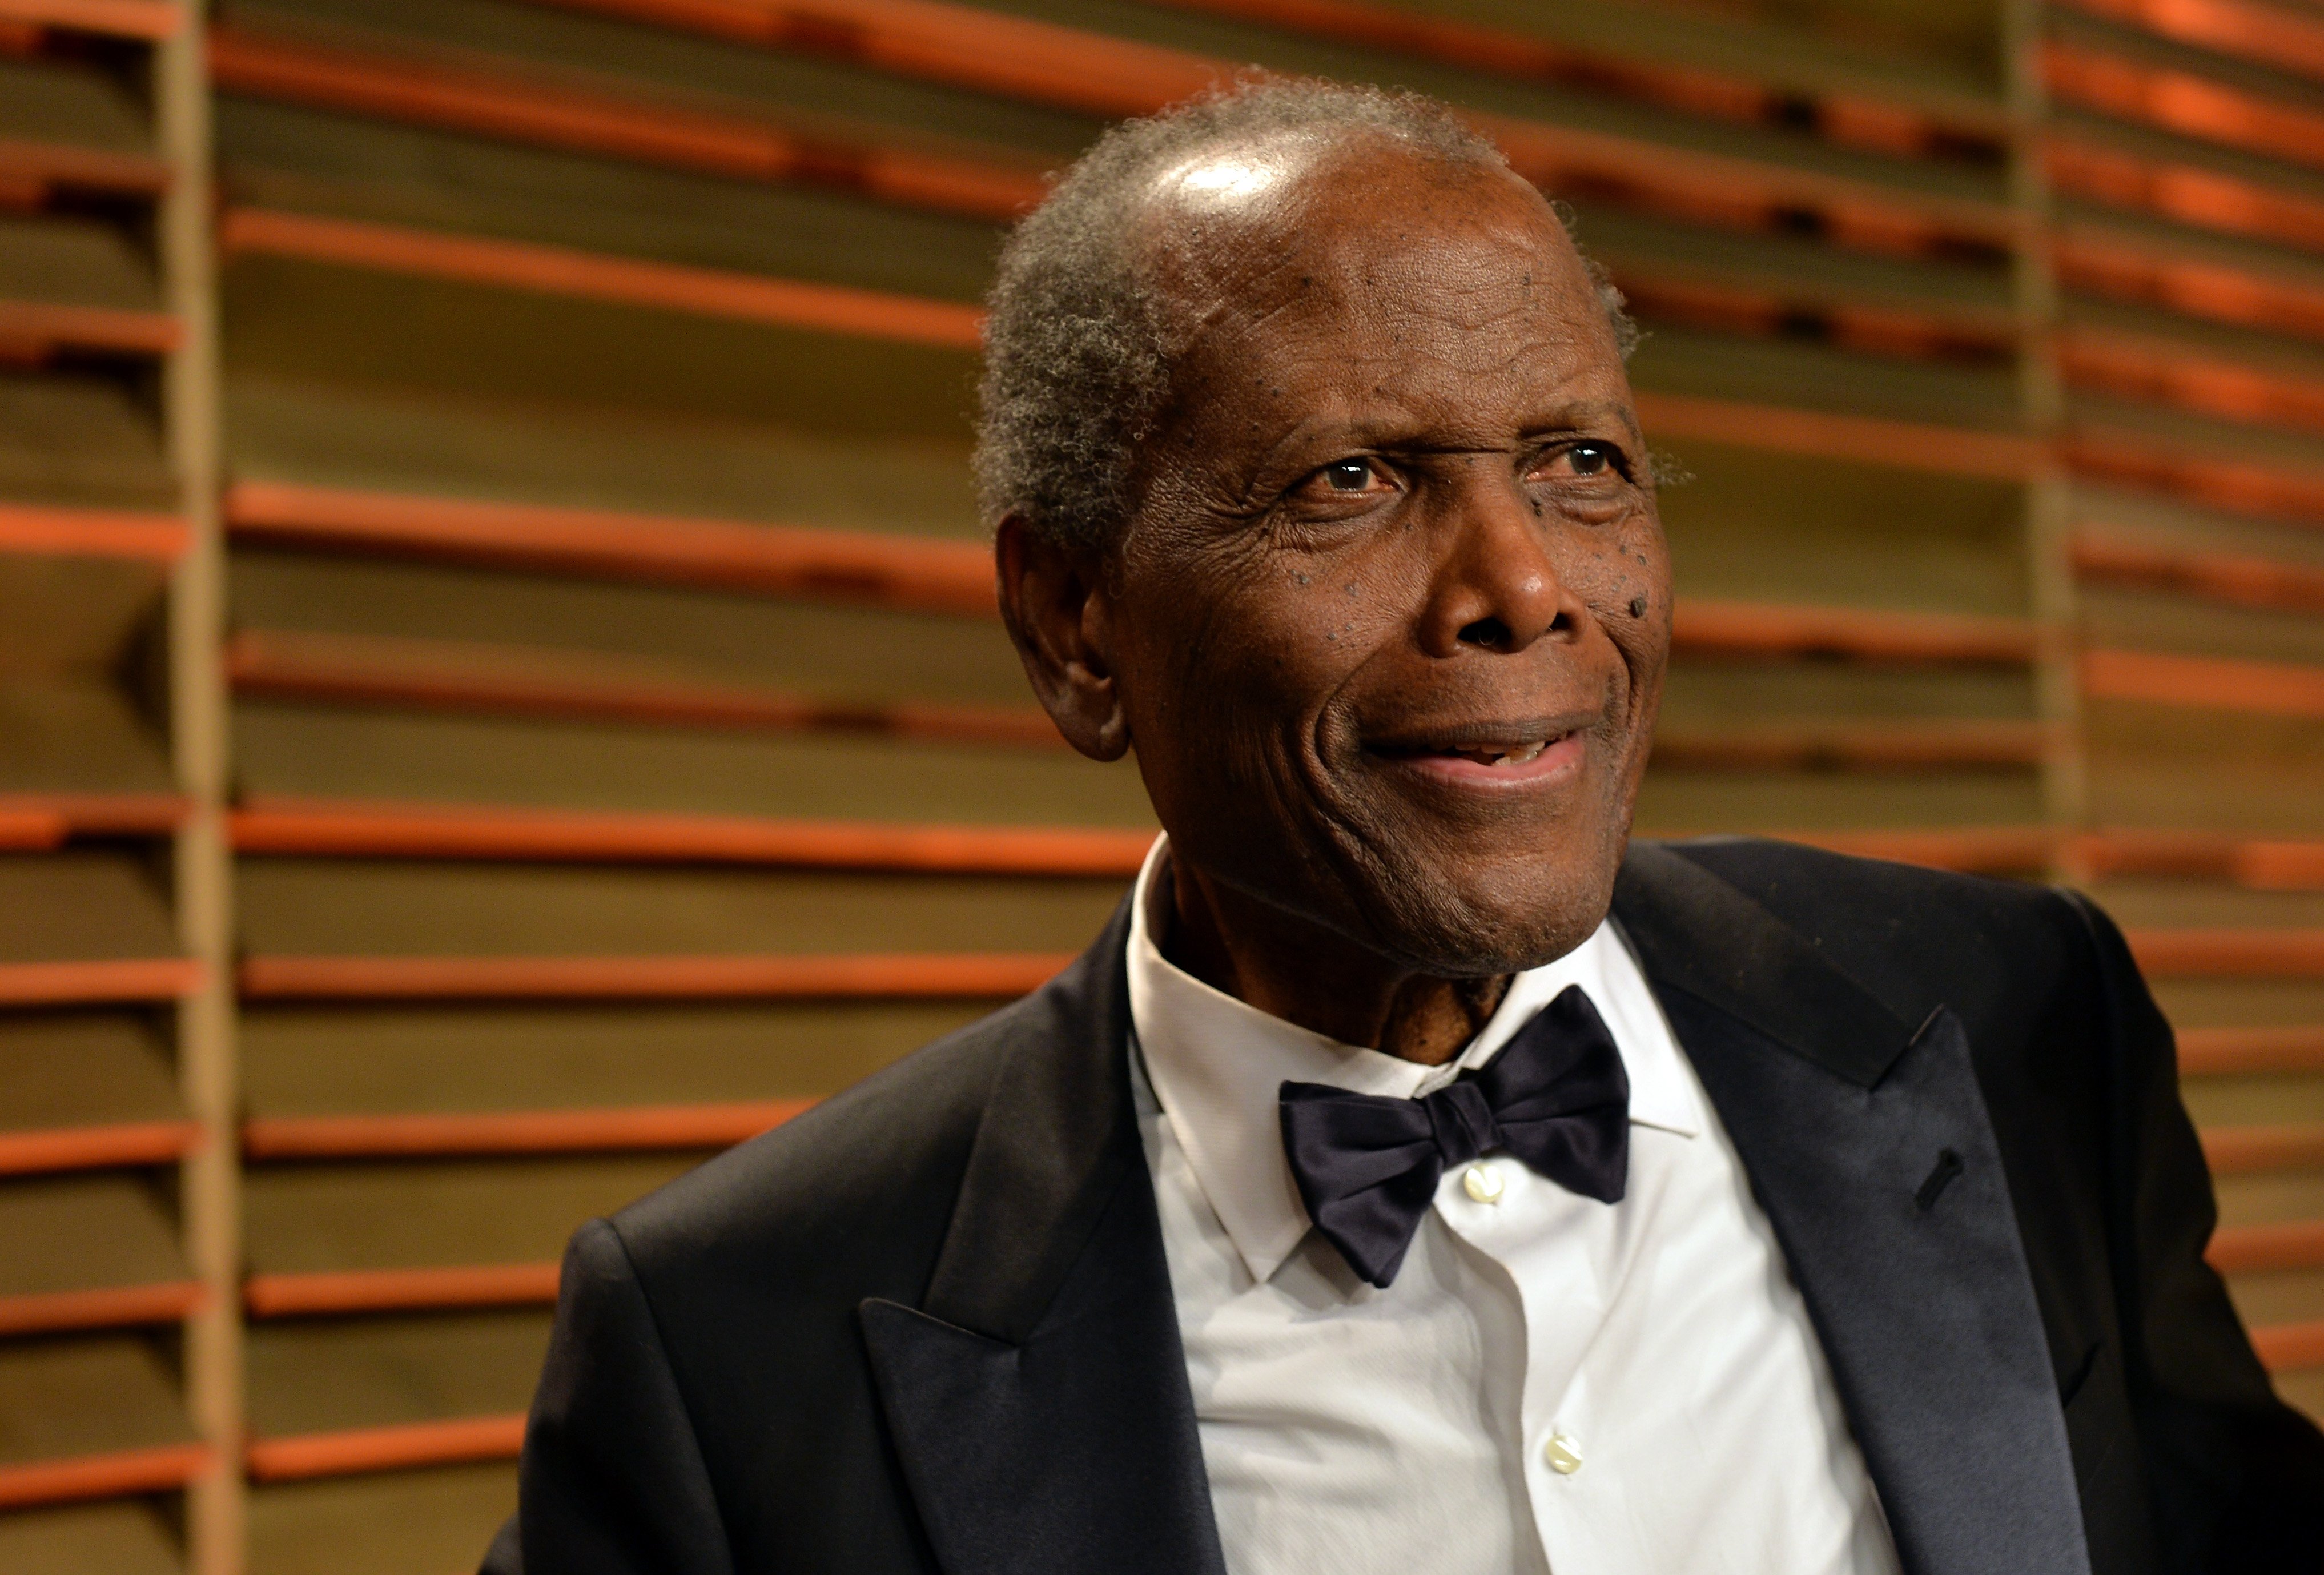 Sidney Poitier attends the 2014 Vanity Fair Oscar Party Hosted By Graydon Carter, 2014, West Hollywood. | Photo: Getty Images